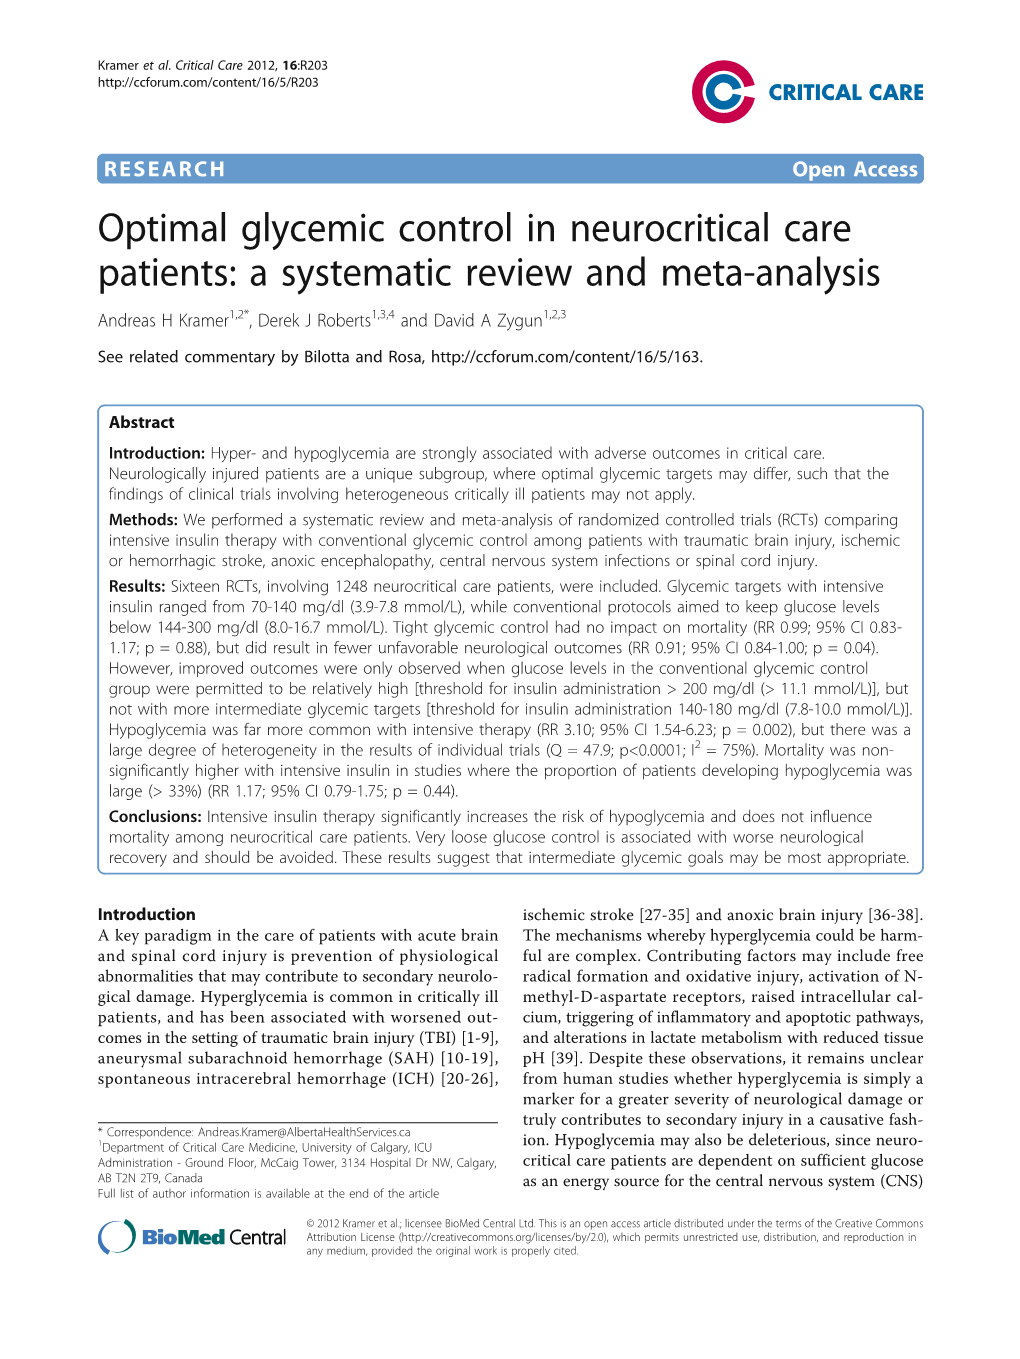 Optimal Glycemic Control in Neurocritical Care Patients: a Systematic Review and Meta-Analysis Andreas H Kramer1,2*, Derek J Roberts1,3,4 and David a Zygun1,2,3